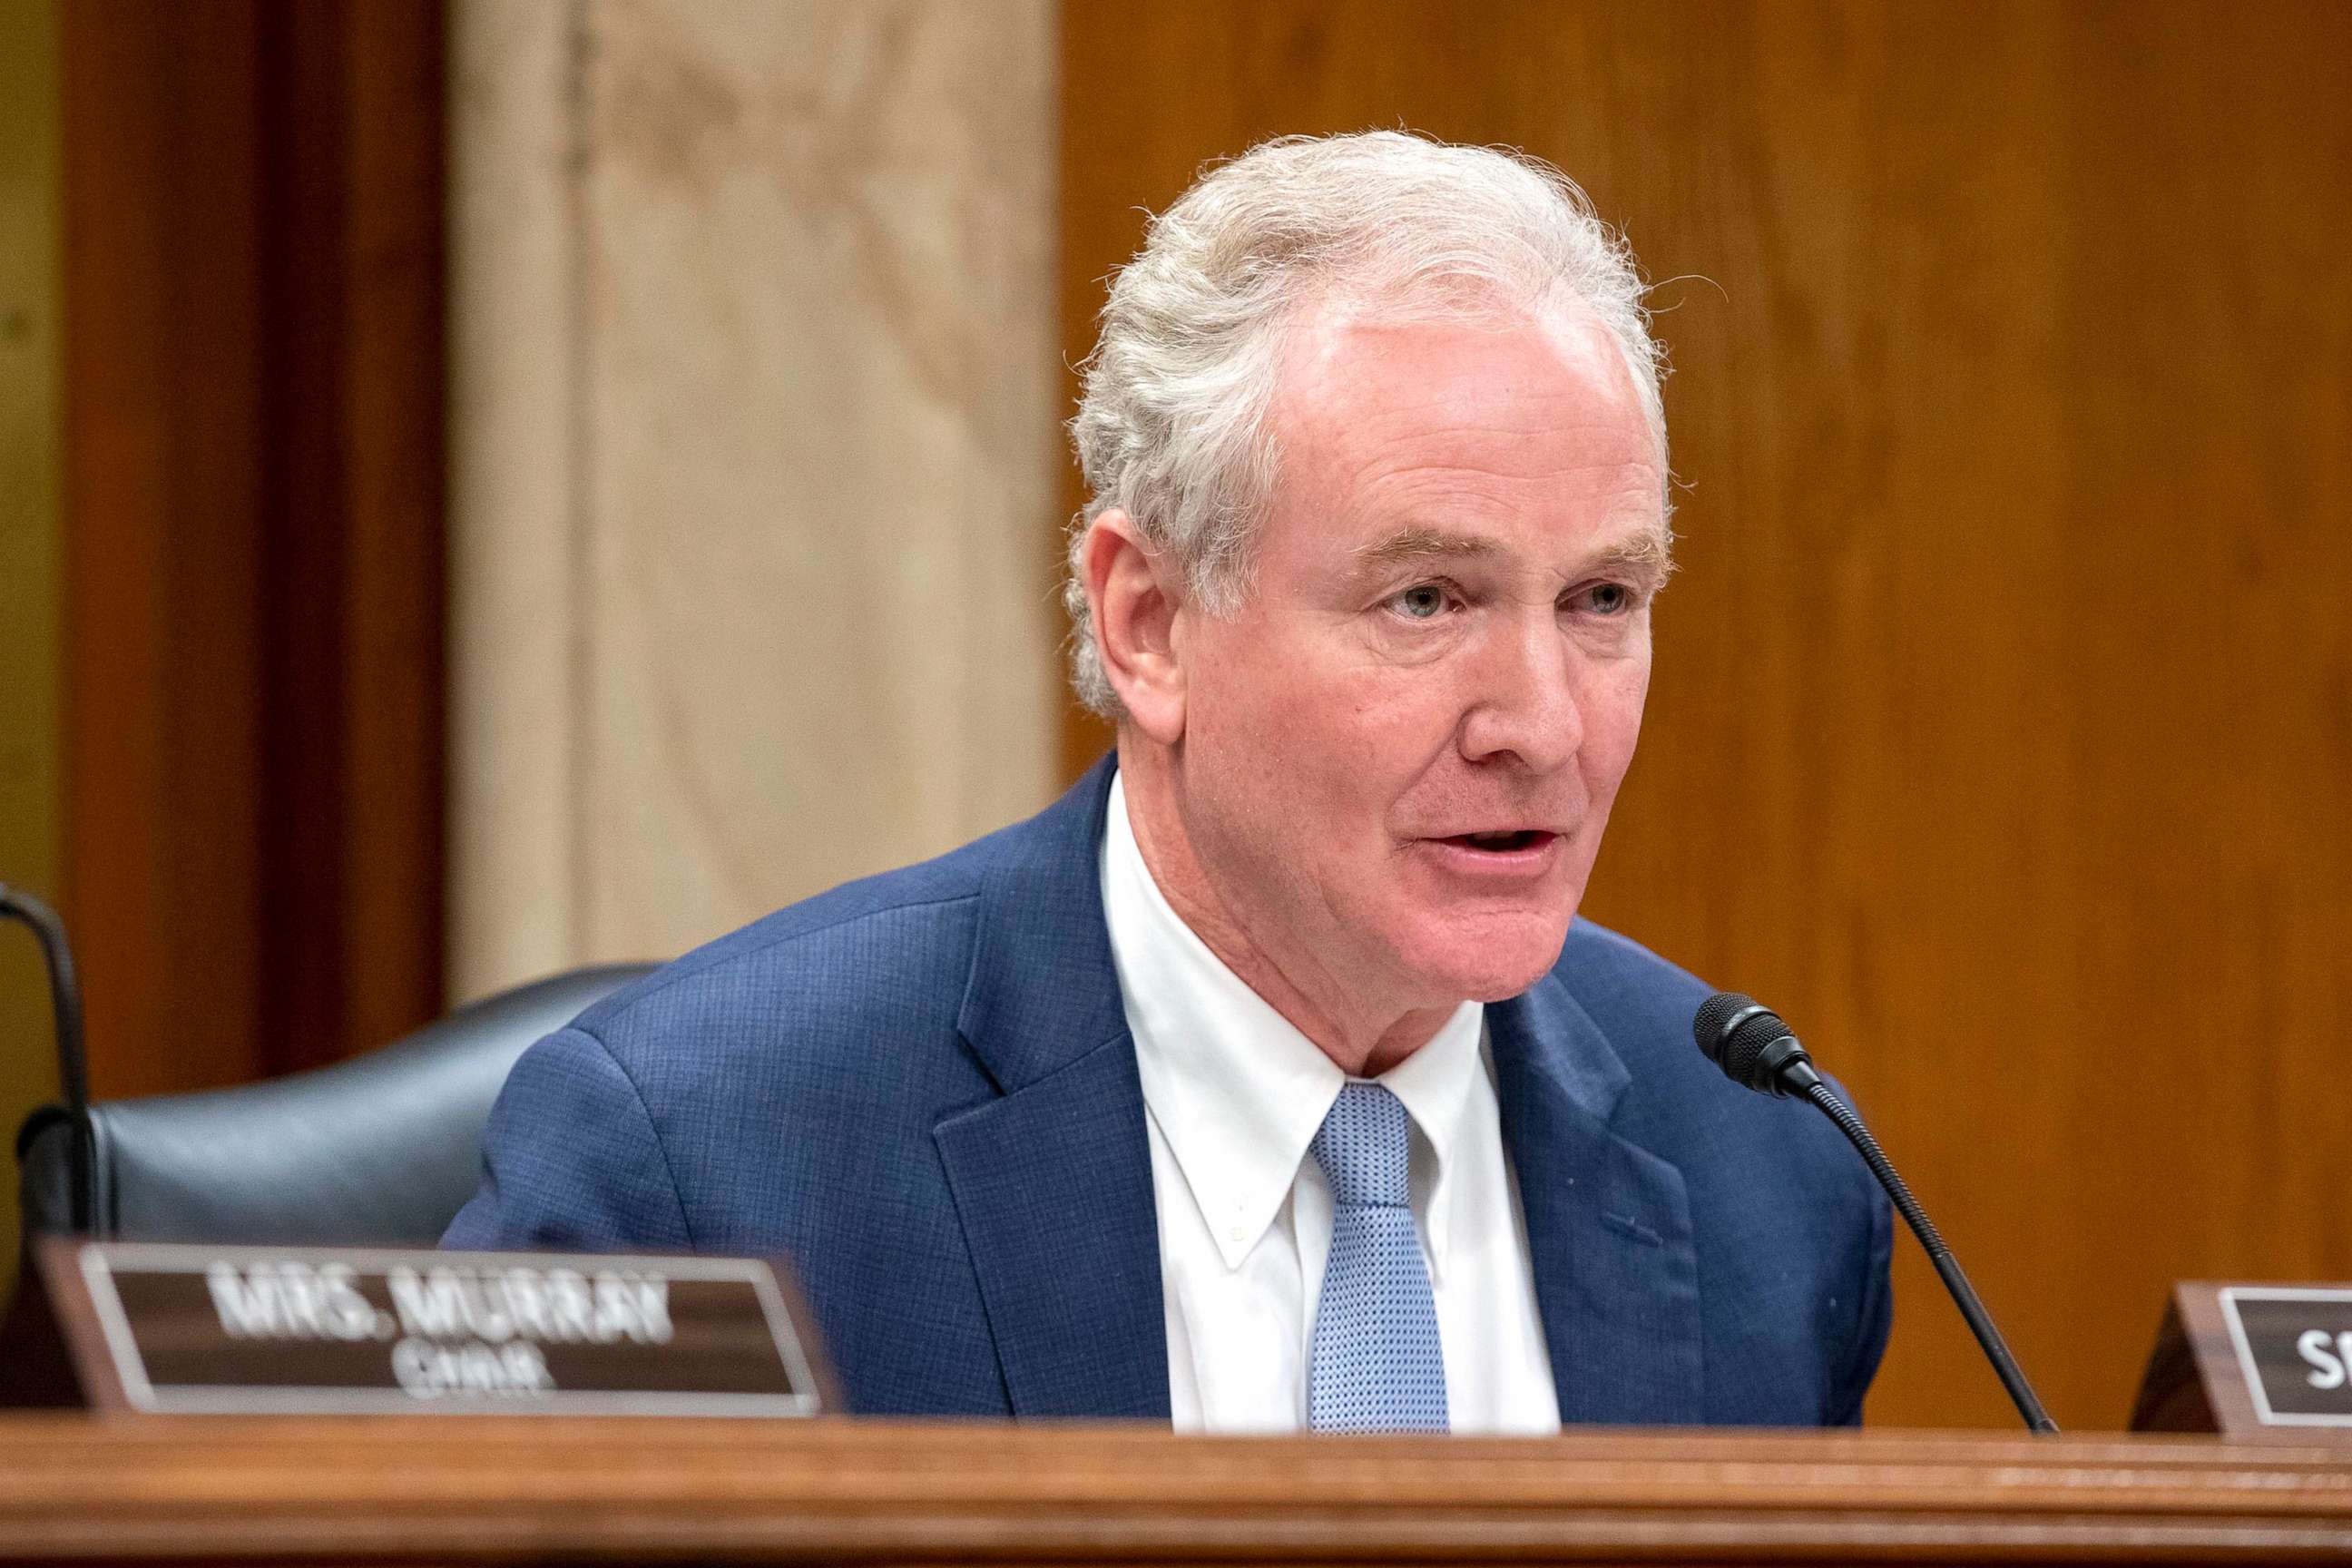 PHOTO: In this March 22, 2023, file photo, Sen. Chris Van Hollen speaks during a senate appropriations subcommittee hearing at the Capitol in Washington, D.C.